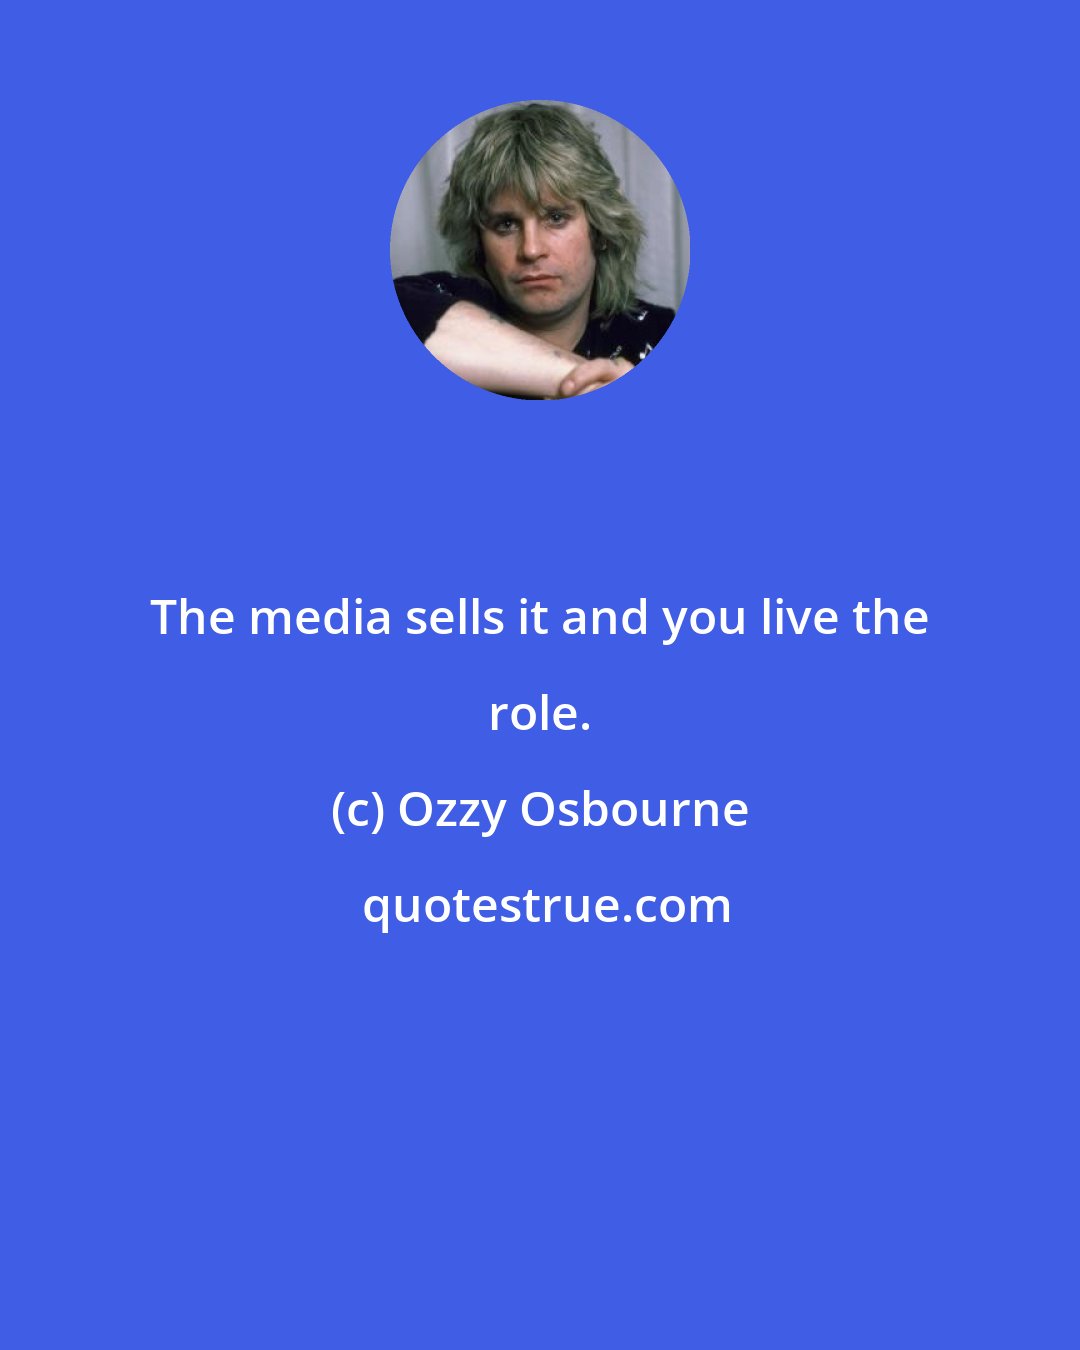 Ozzy Osbourne: The media sells it and you live the role.